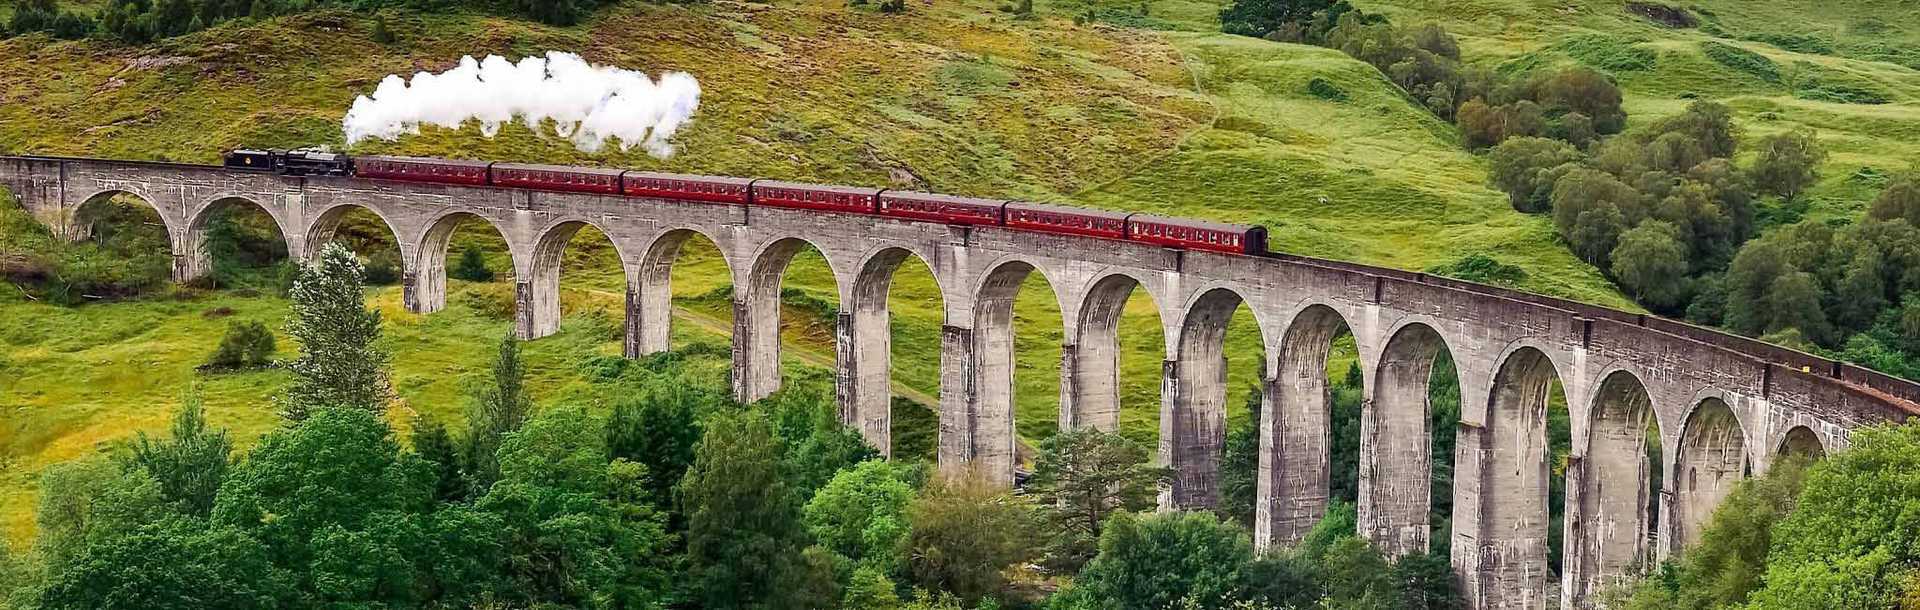 Jacobite steam train going across the Glenfinnan Viaduct in Scotland, UK